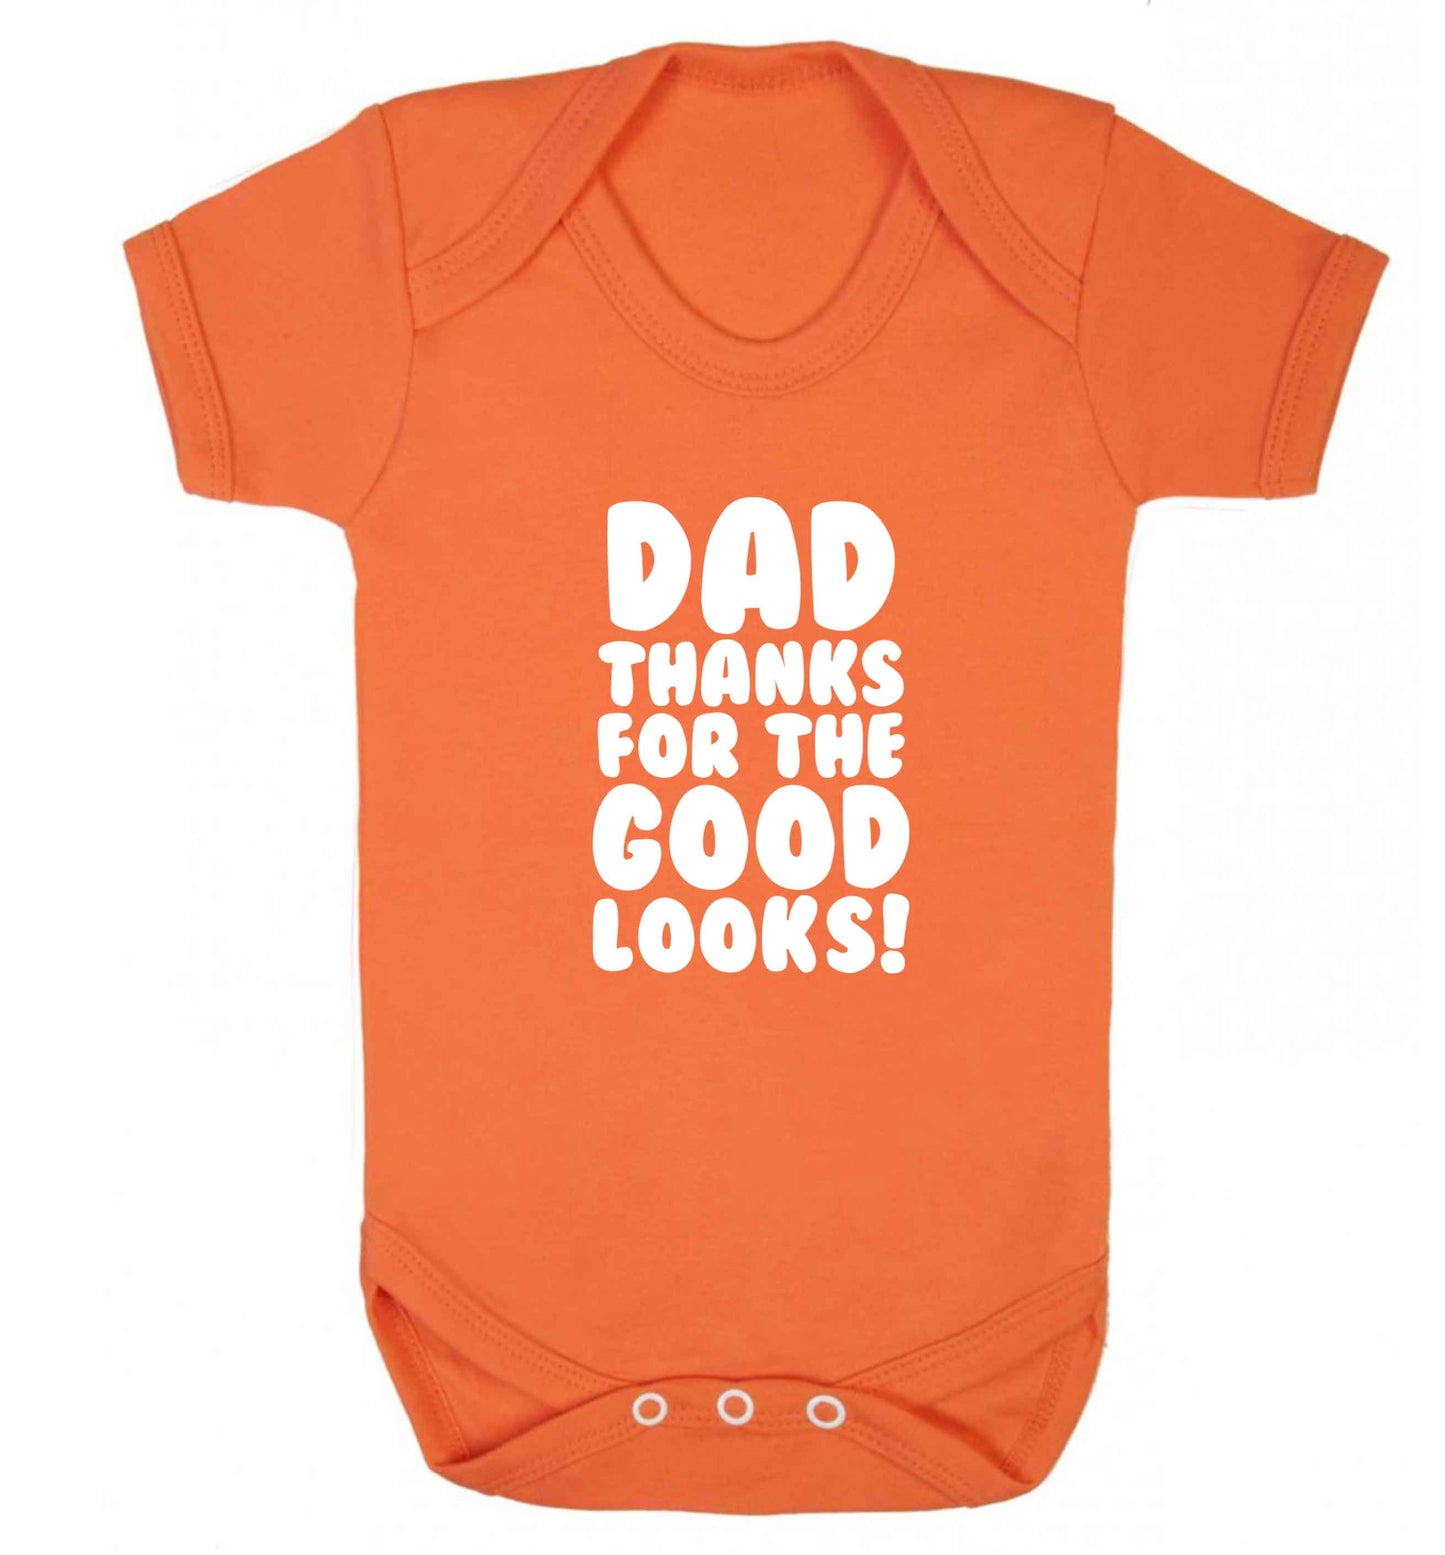 Dad thanks for the good looks baby vest orange 18-24 months